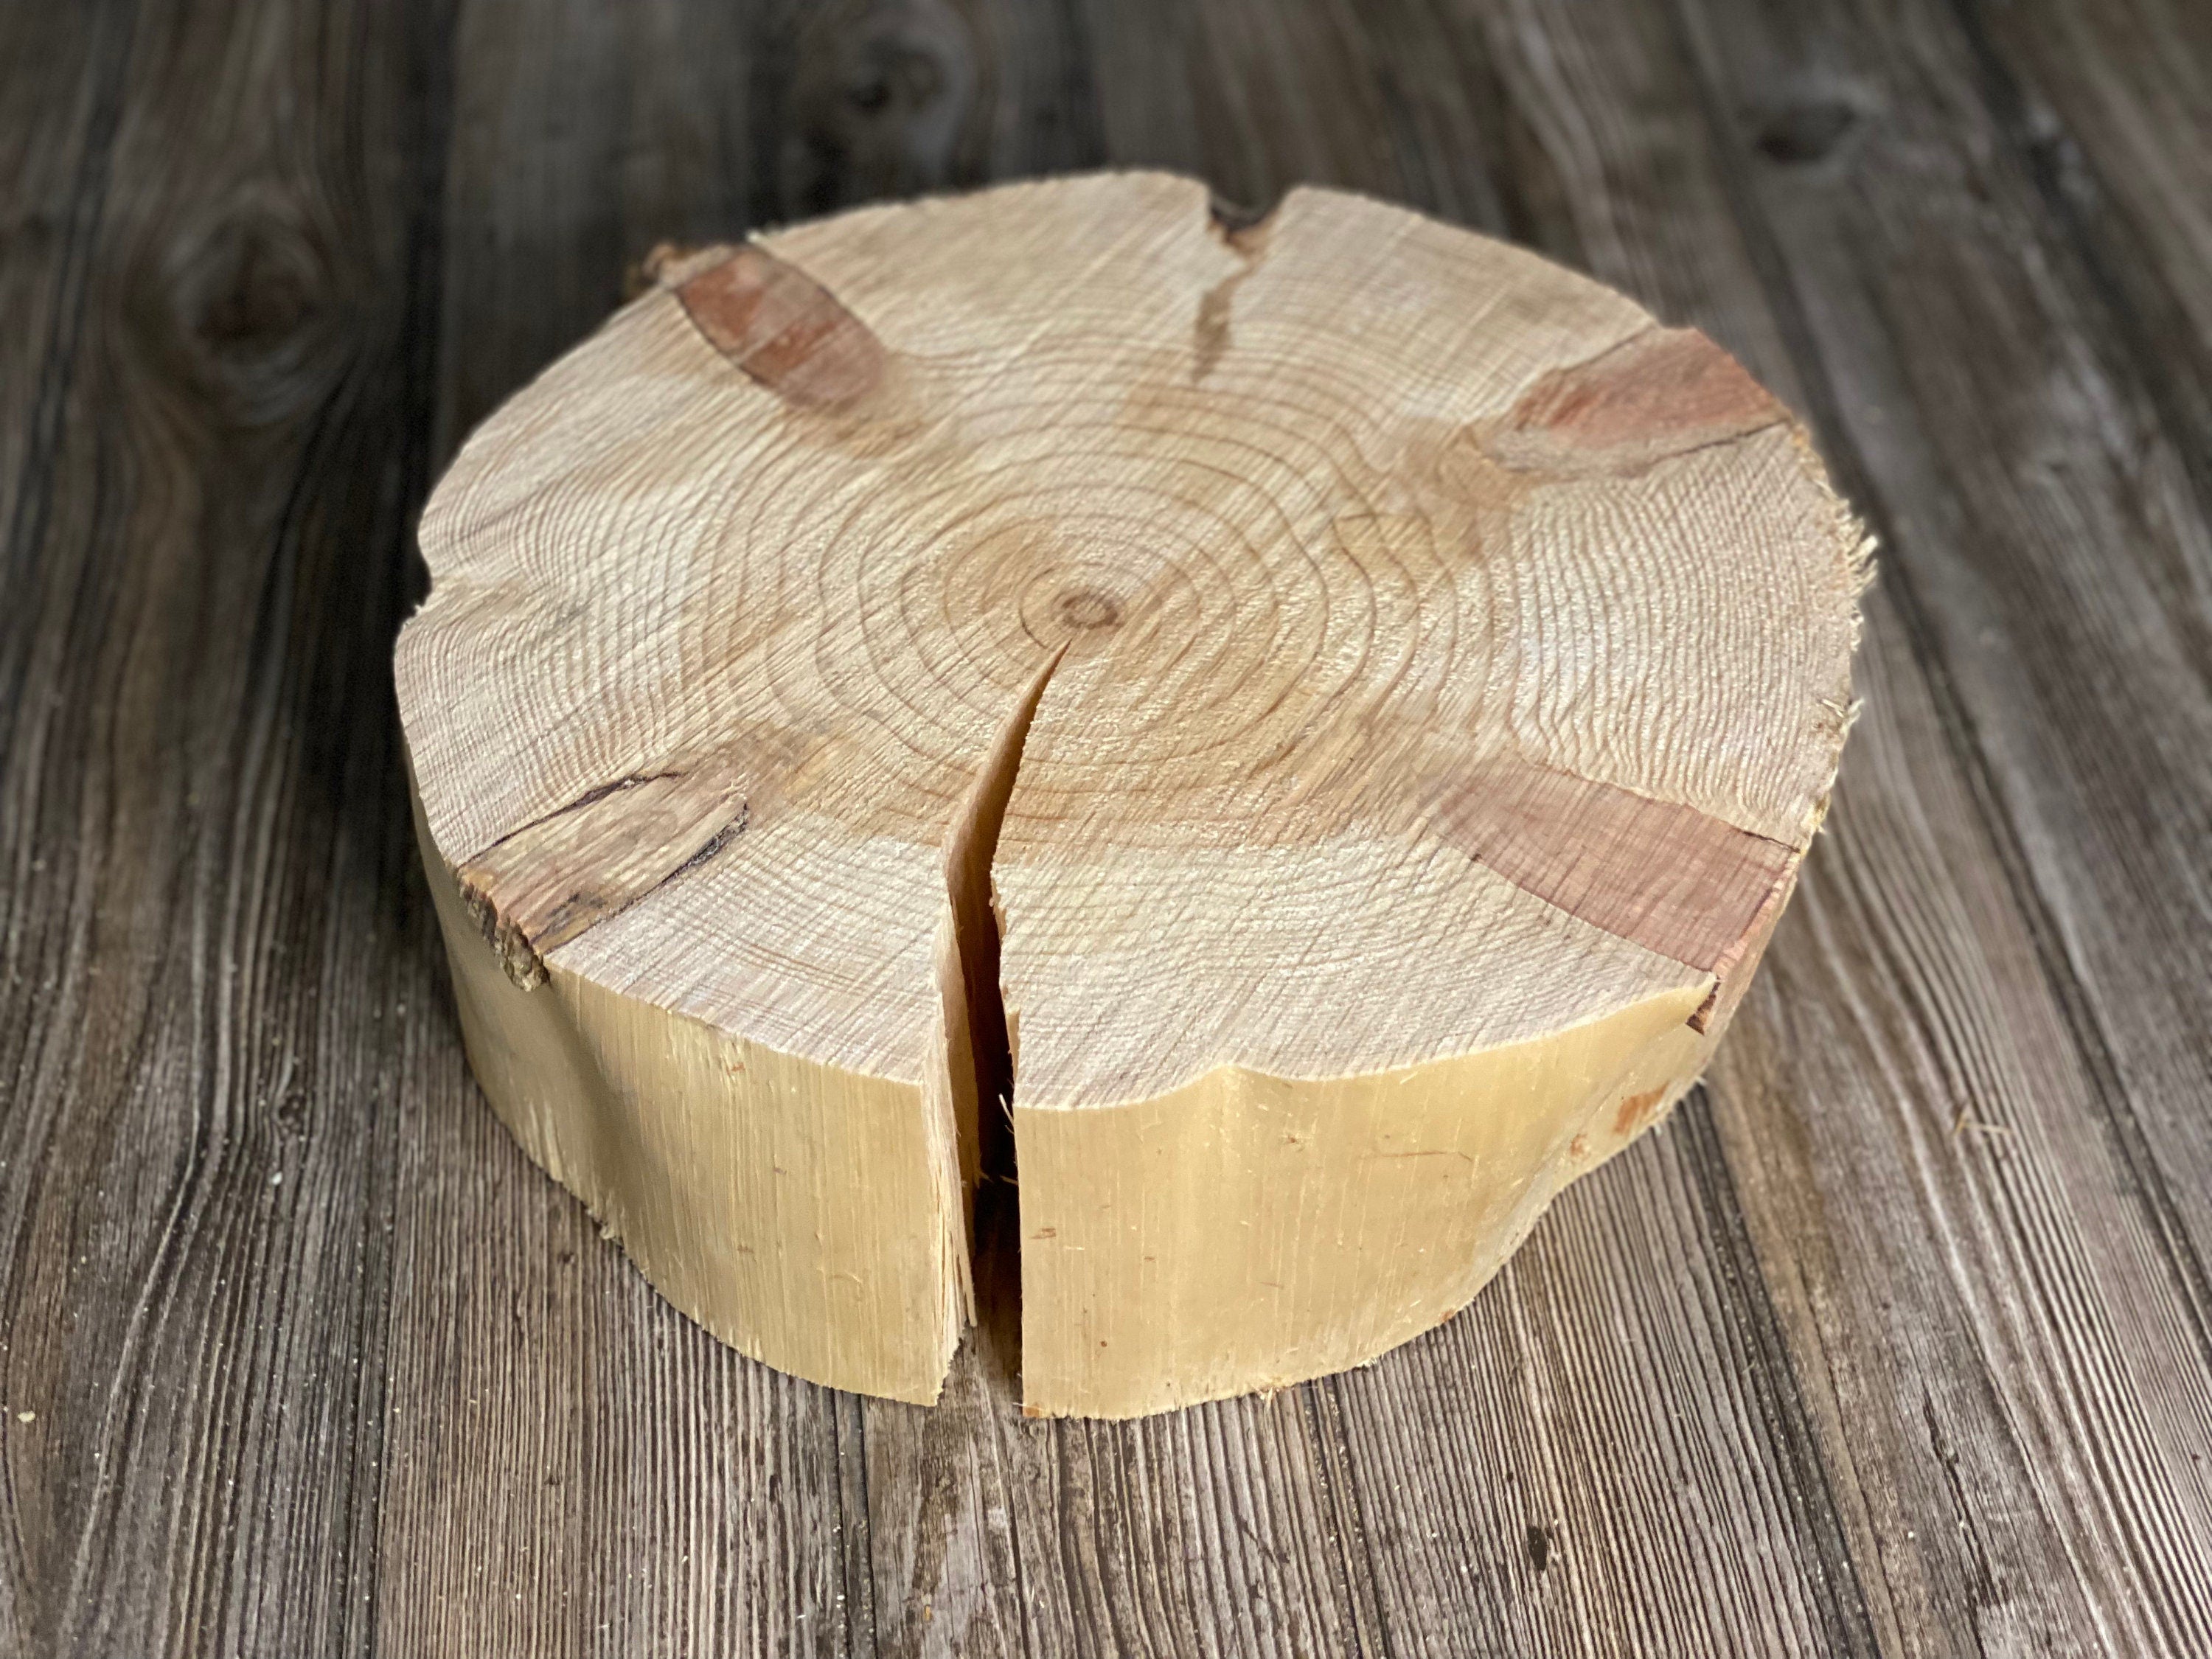 Pine Slice, Approximately 12 Inches Long by 12 Inches Wide and 4.5 Inches Tall